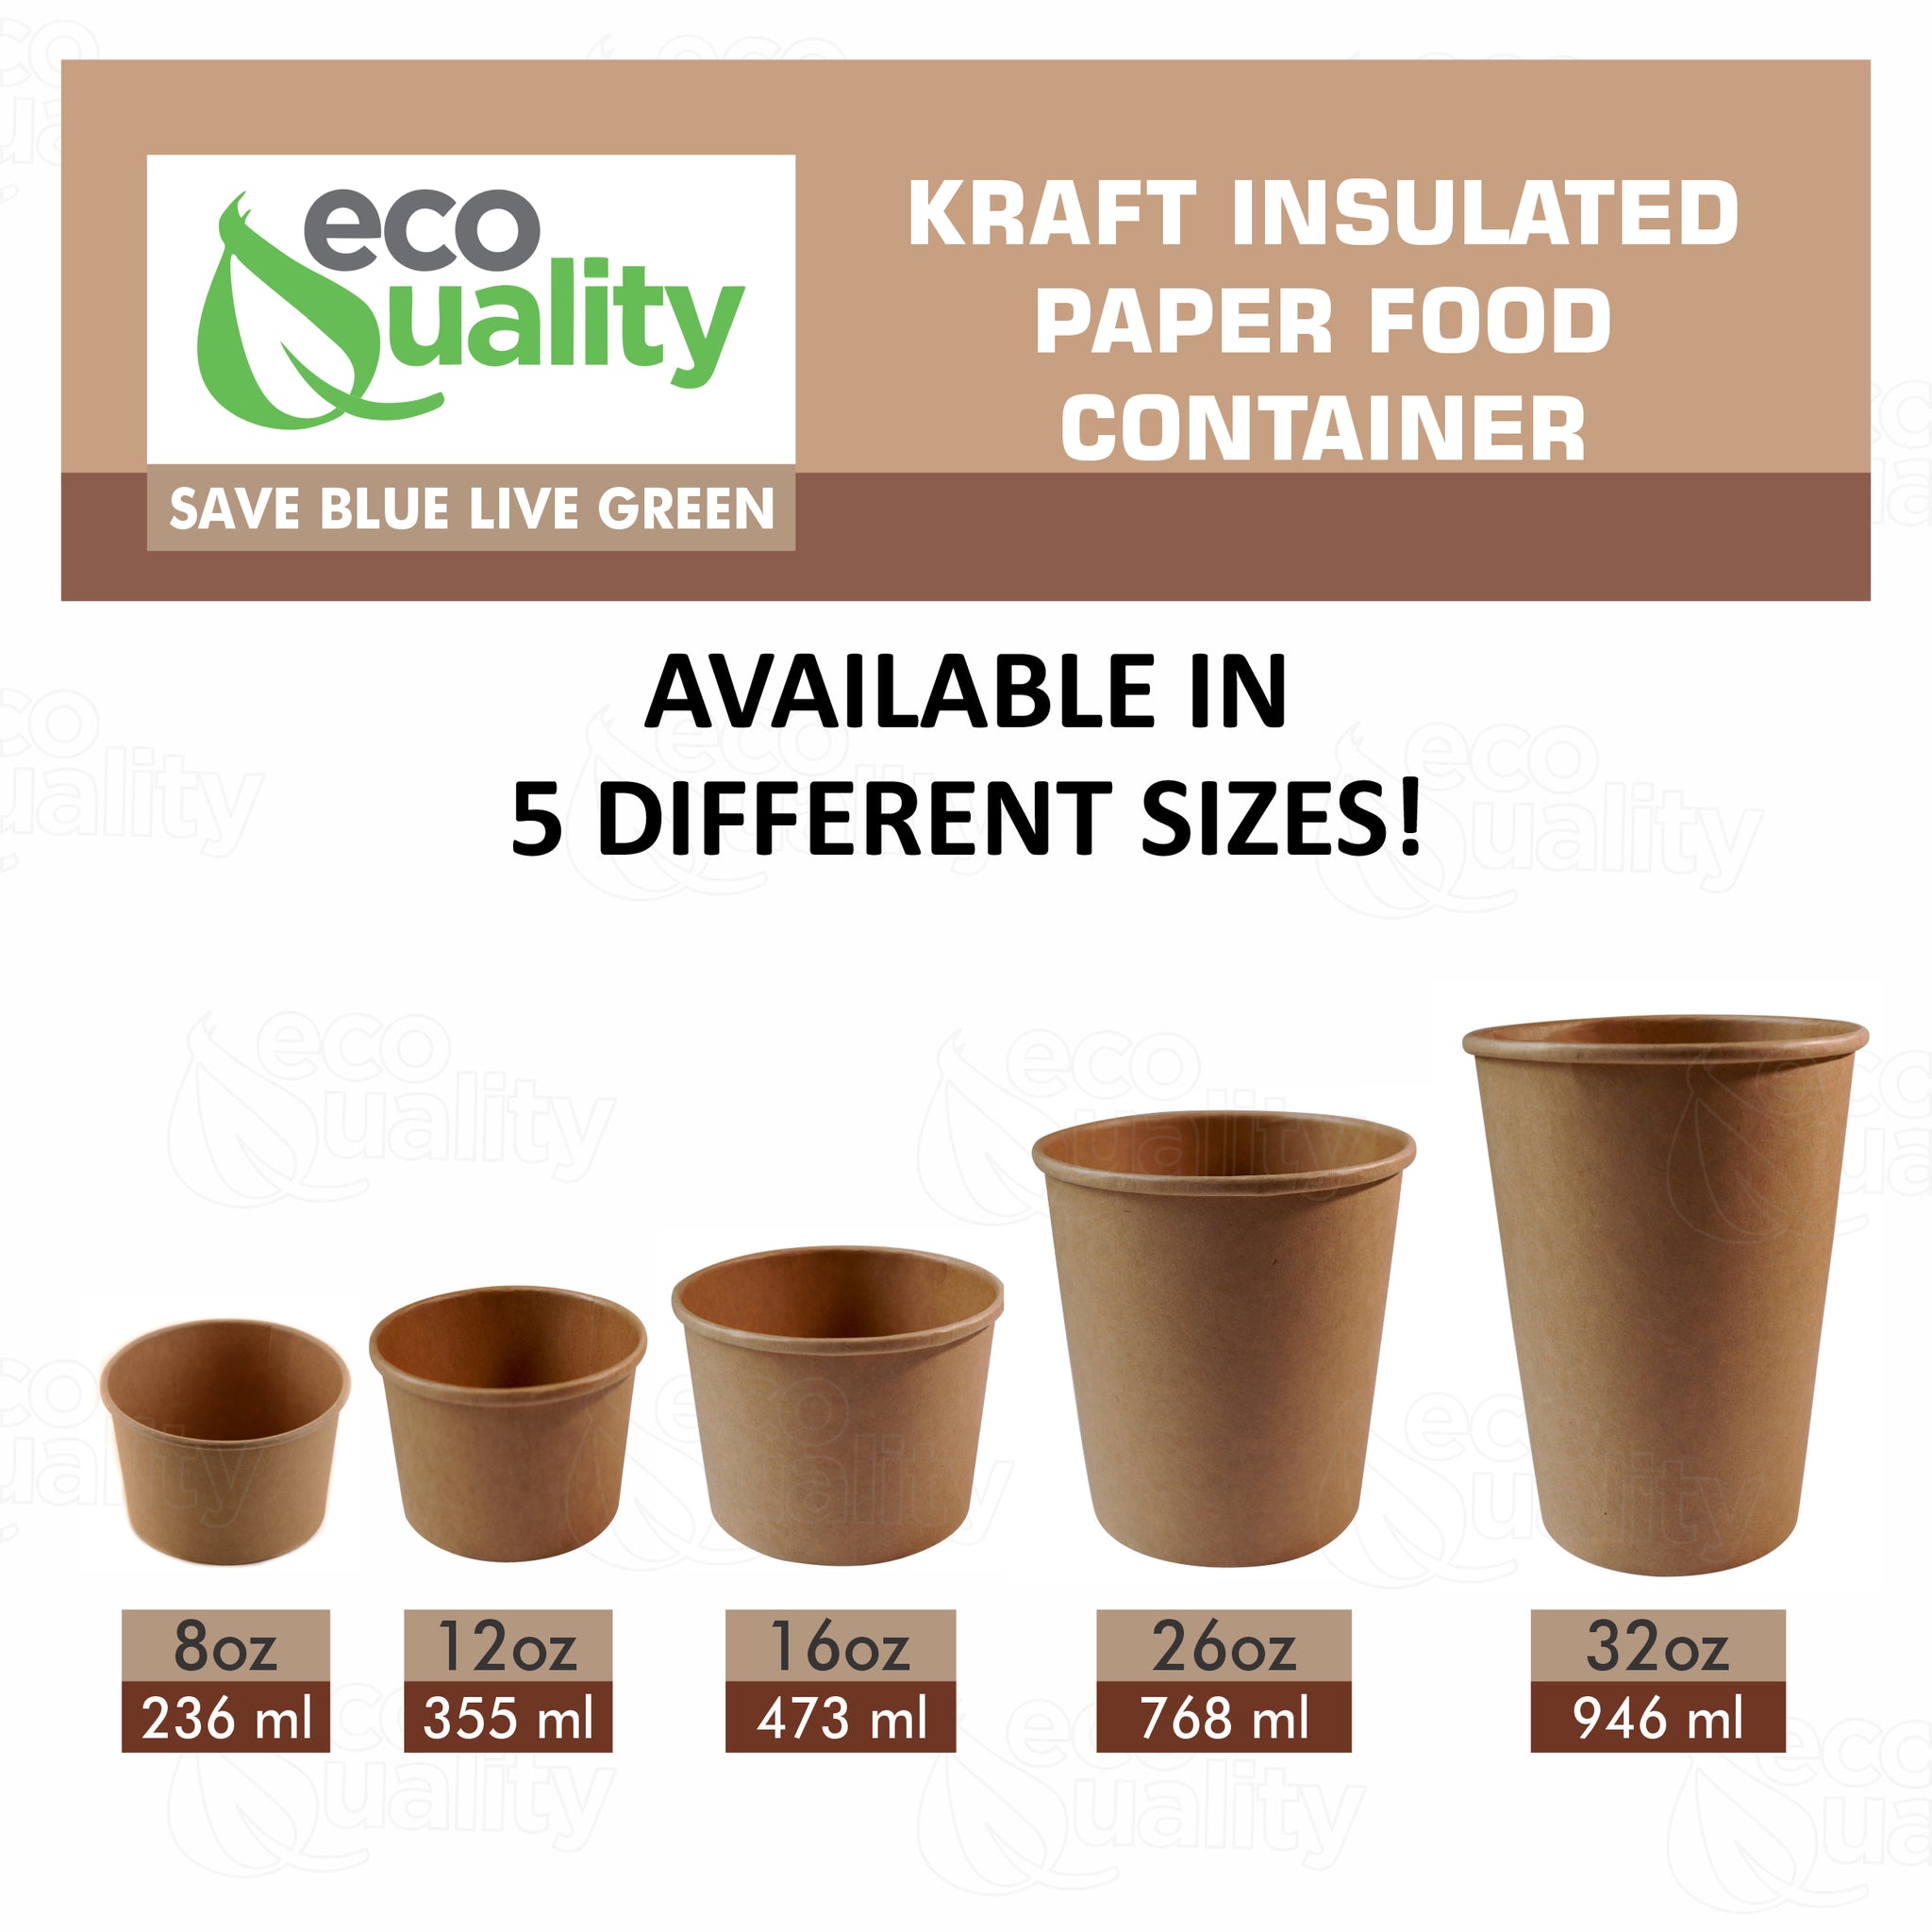 Ice cream soup yogurt cups Take out food container Nyc Restaurant cafe shop office home disposable catering supplies kraft Paper heavy duty strong sturdy leak free proof bulk economical wholesale ecoquality Ecofriendly compostable biodegradable